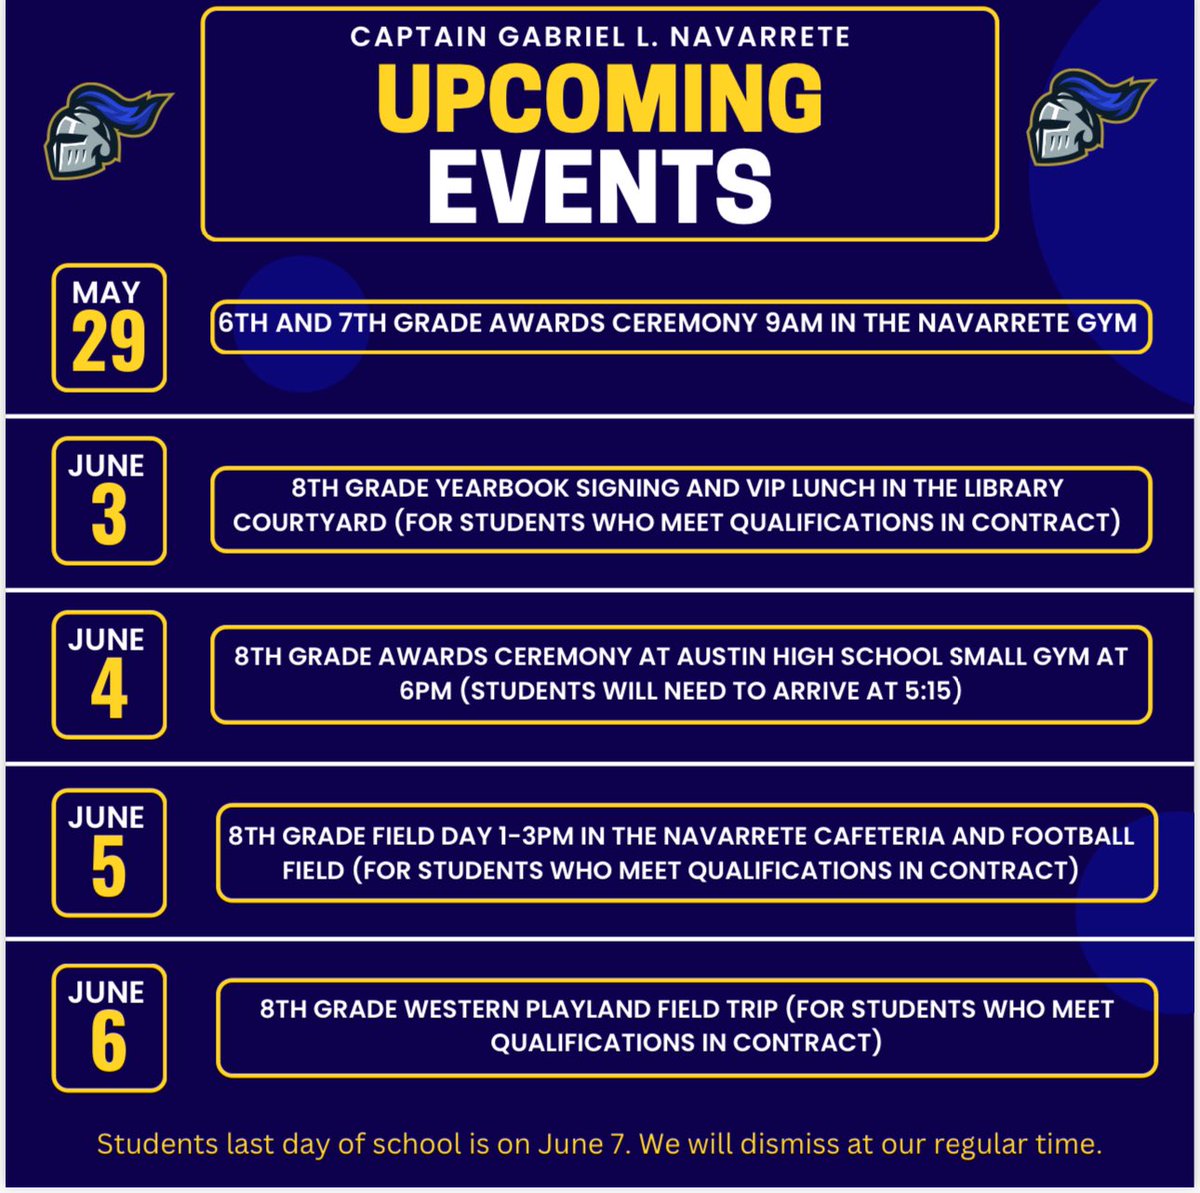 The celebrations are quickly approaching! Don’t miss out on any important dates. #ItStartsWithUs #KnightNation